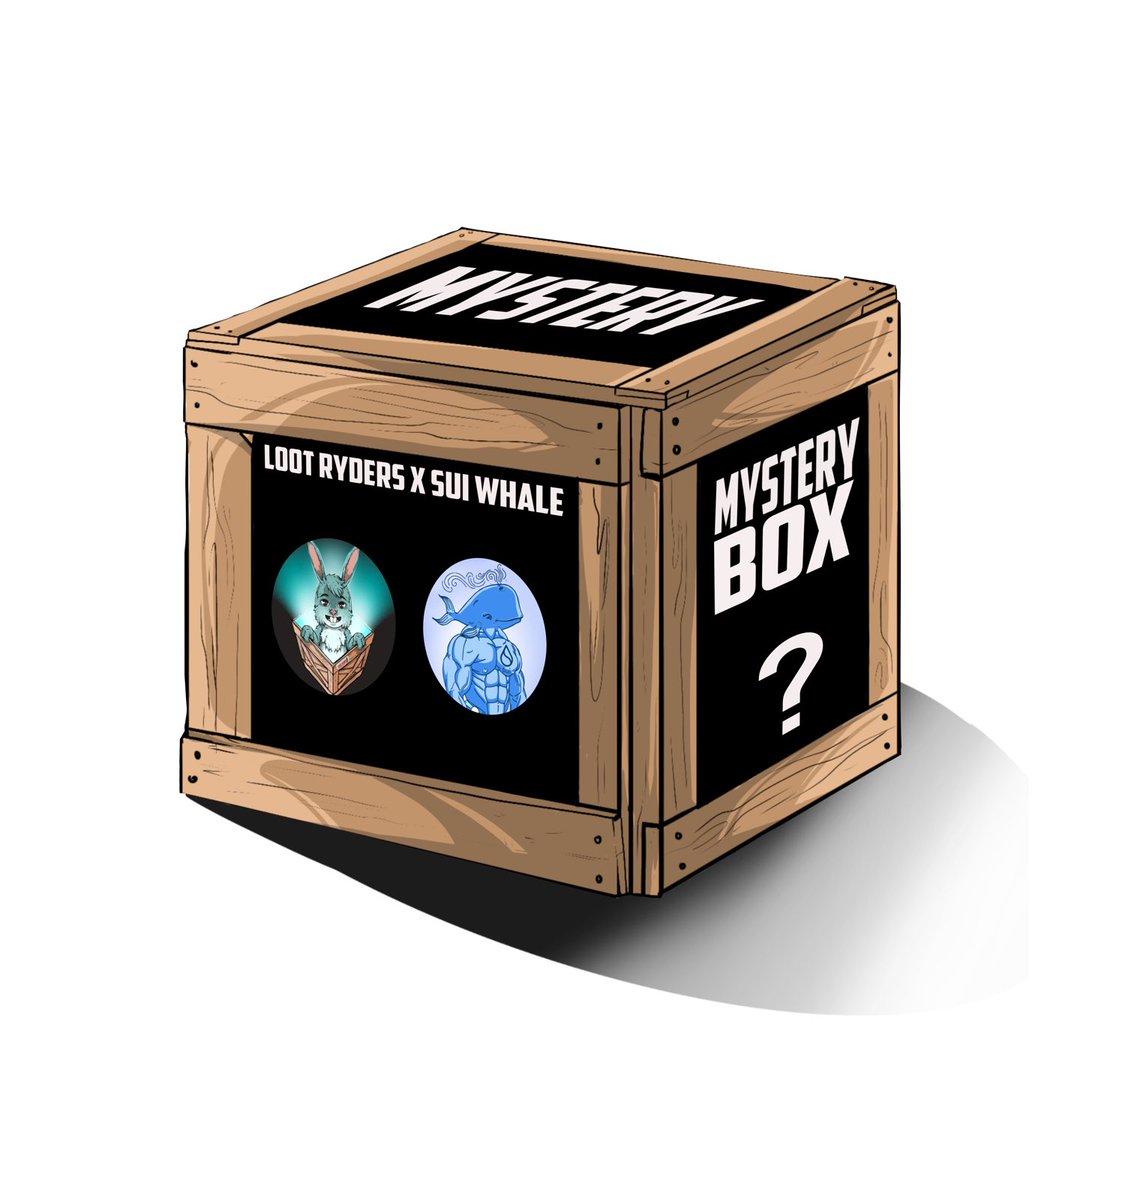 Loots Ryders Mystery Box 🎁 Boxes may contain the following: 💎 $LOOT TOKENS AIRDROP 💎 FREE NFT 💎 50 $ USDT 💎 OG ROLE 💎 WHITELIST SPOT 👉 Open the MYSTERY BOX: galxe.com/SuiWhale/campa… 📦 Max Supply: 10000 ⏳ 3 DAYS #Airdrop #Sui